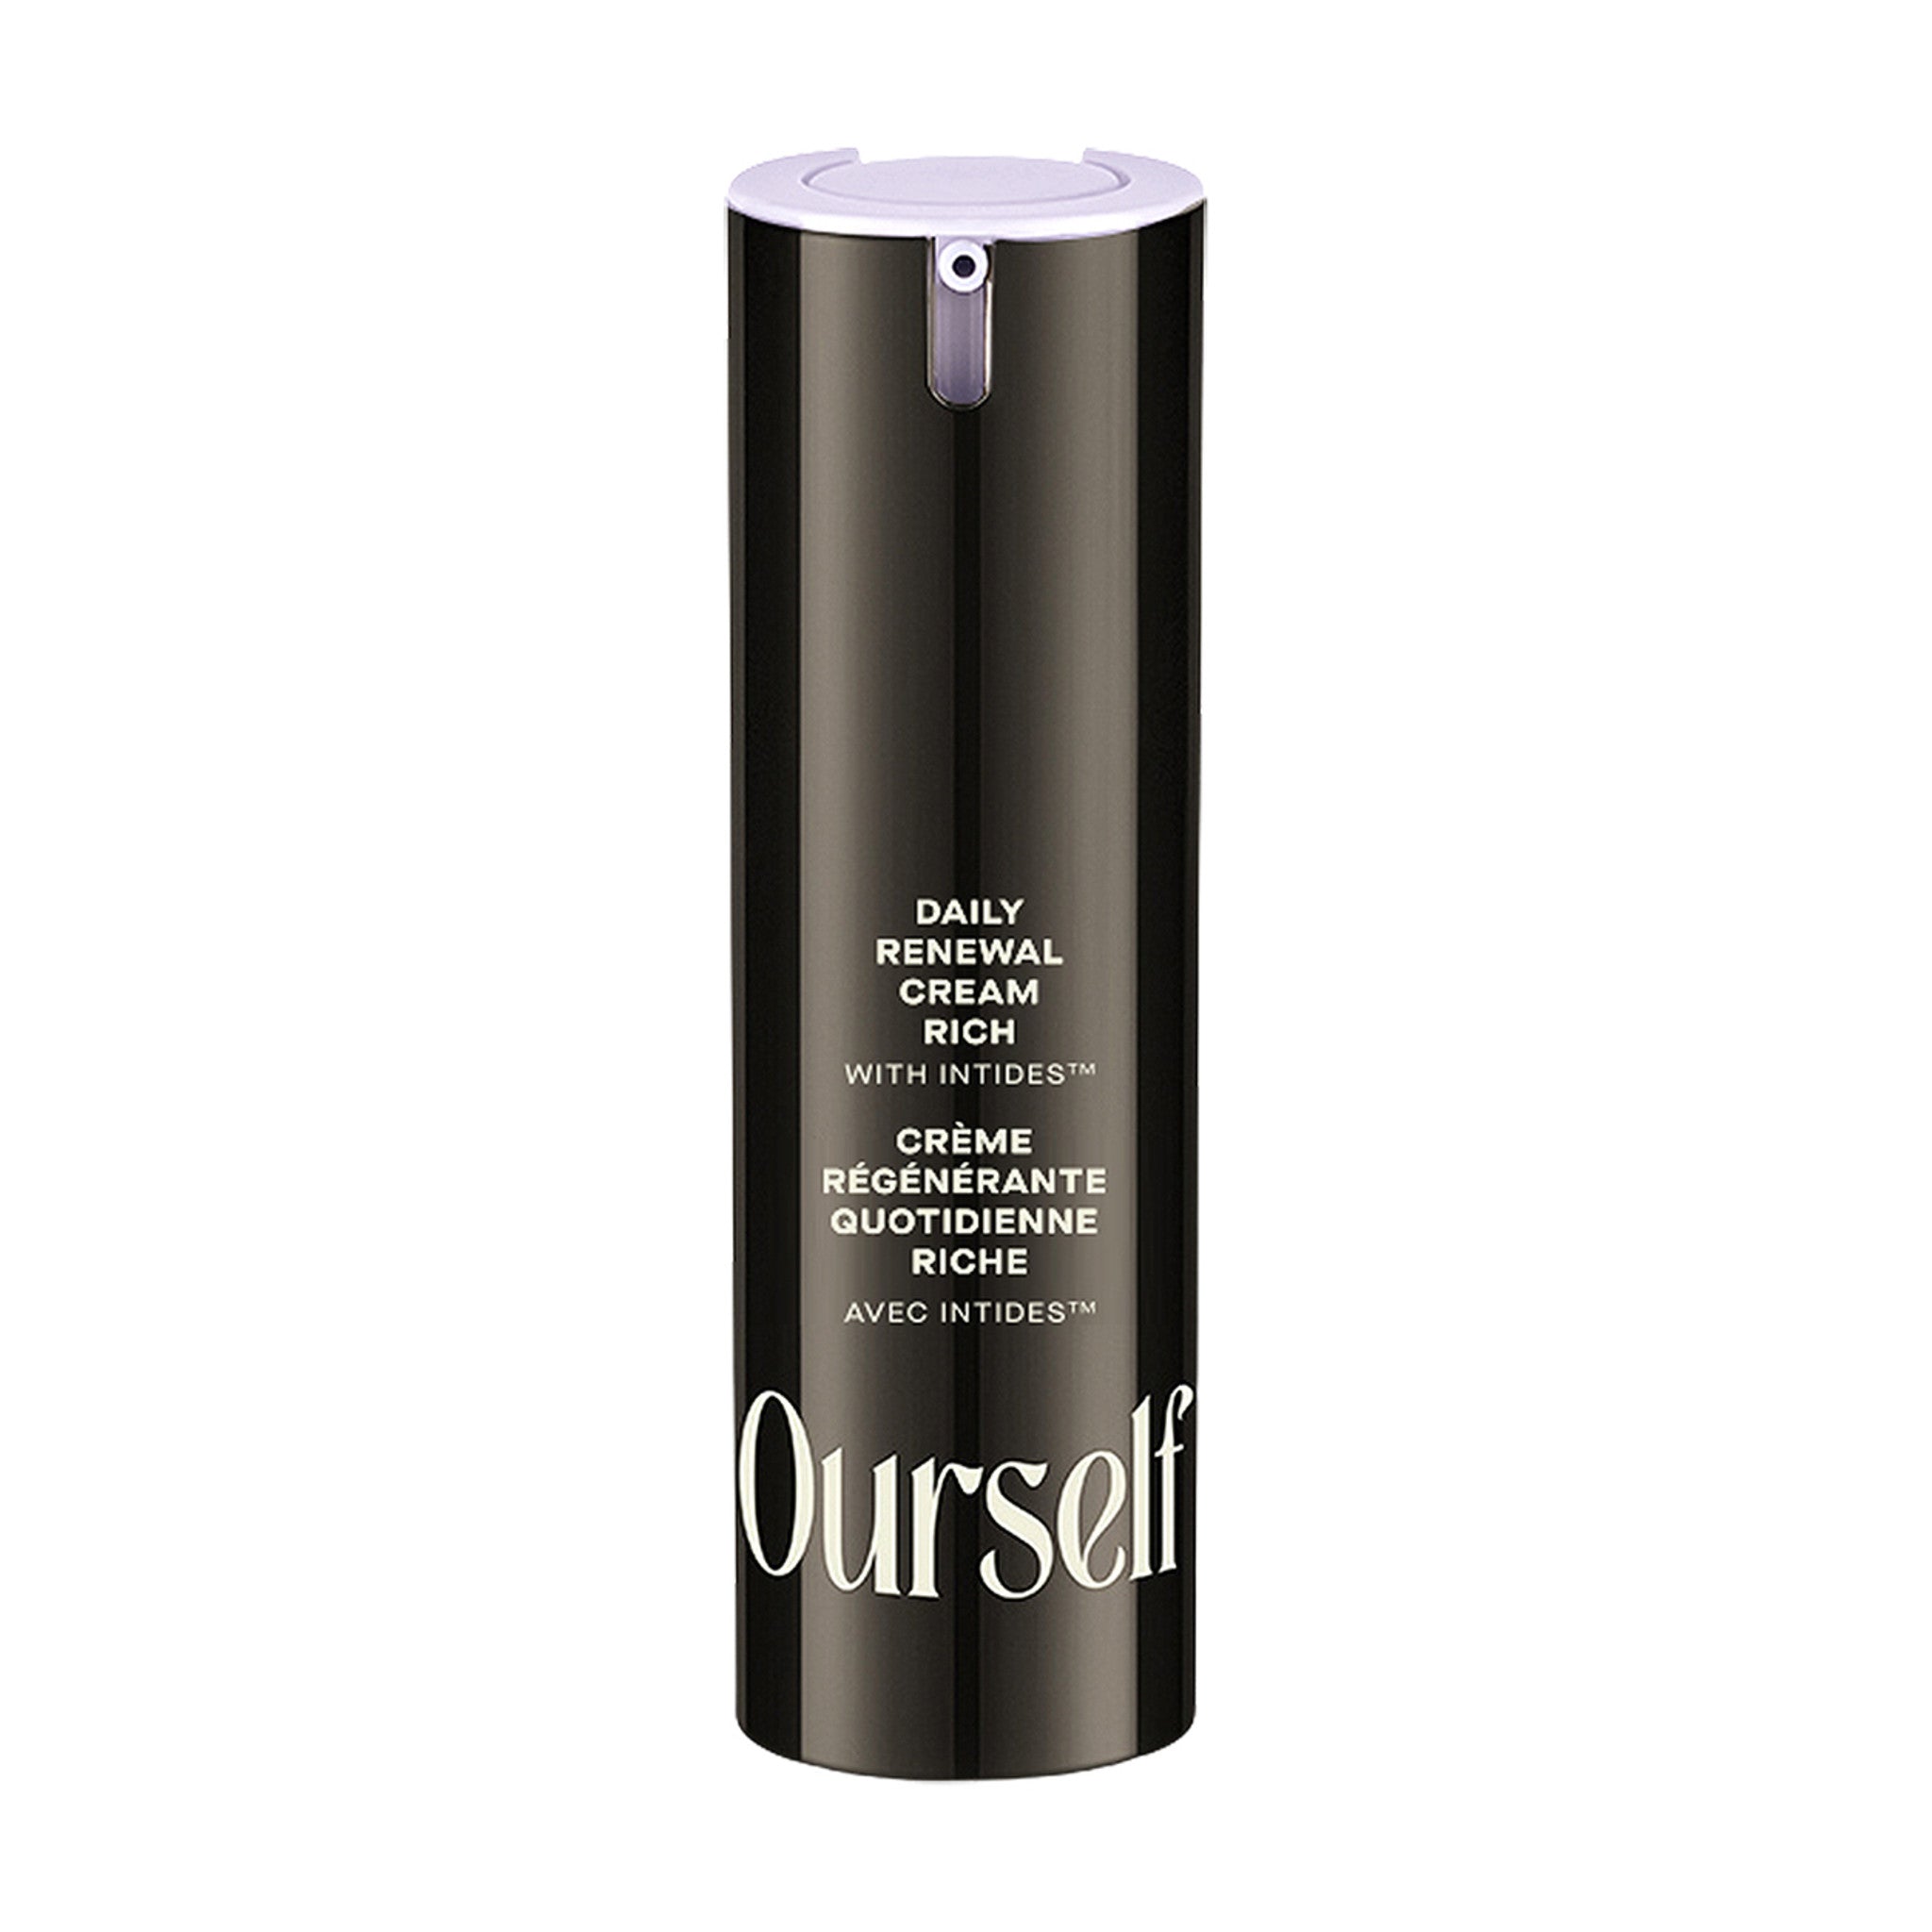 Ourself Daily Renewal Cream Rich main image.